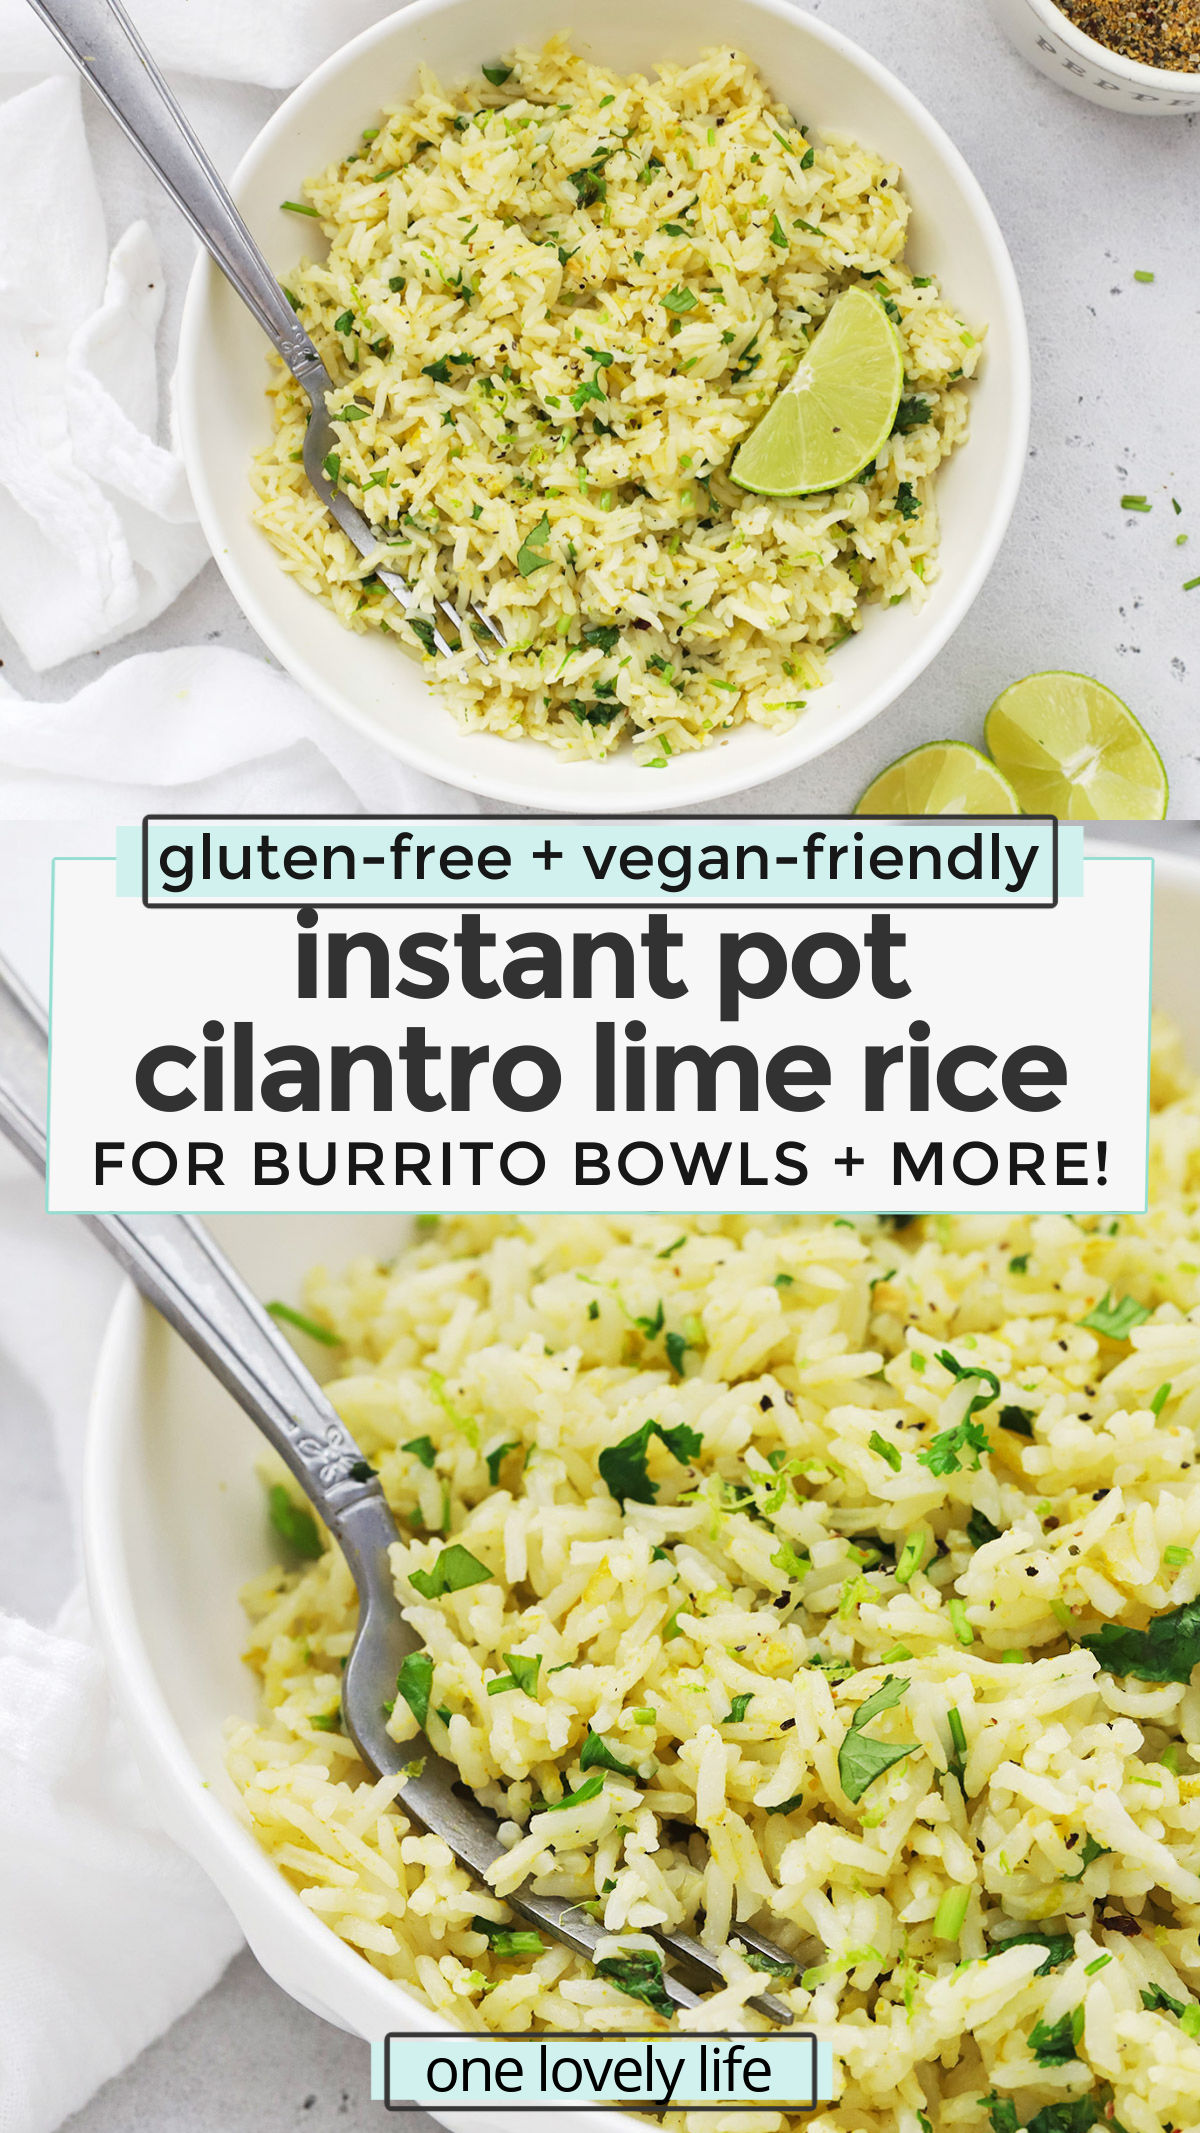 Instant Pot Cilantro Lime Rice - Restaurant style cilantro lime rice is easier than ever thanks to the pressure cooker! This method will give you fluffy, flavorful rice perfect as a side dish, tucked into burrito bowls, burritos & more! (Vegan-friendly, gluten-free) // Chipotle Cilantro Lime Rice // Cafe Rio Cilantro Lime Rice // Pressure Cooker Cilantro Lime Rice // #sidedish #cilantrolimerice #rice #burritobowls #tacos #burritos #texmex #taconight #glutenfree #vegetarian